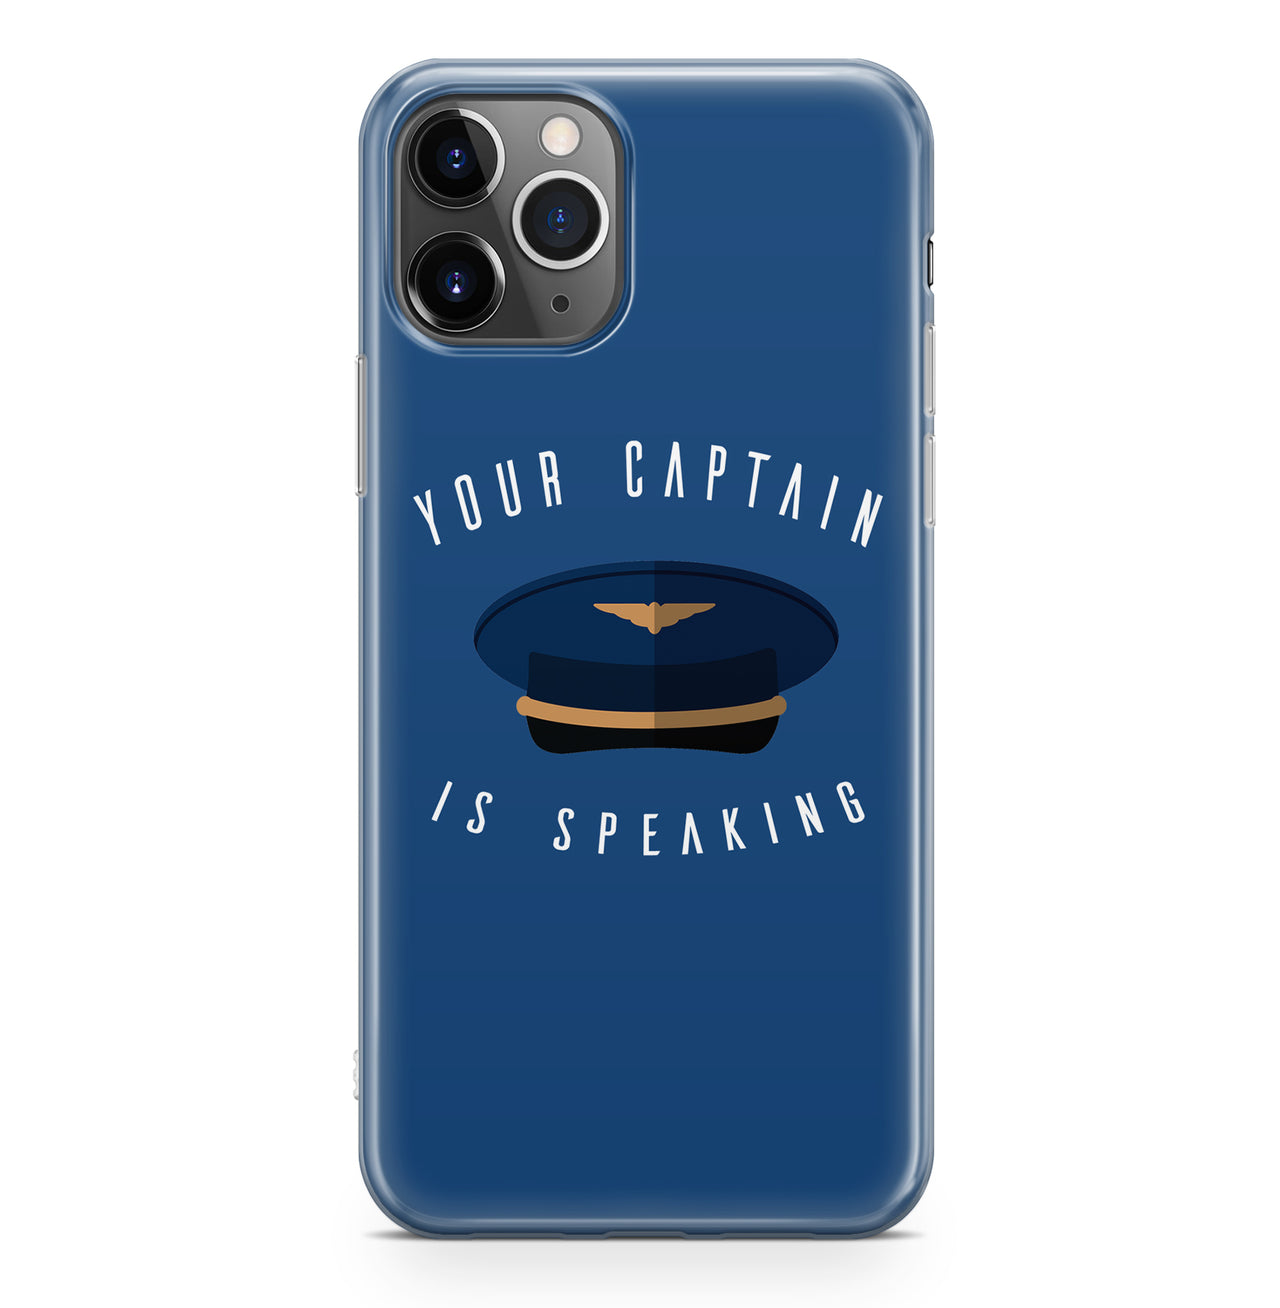 Your Captain Is Speaking Designed iPhone Cases